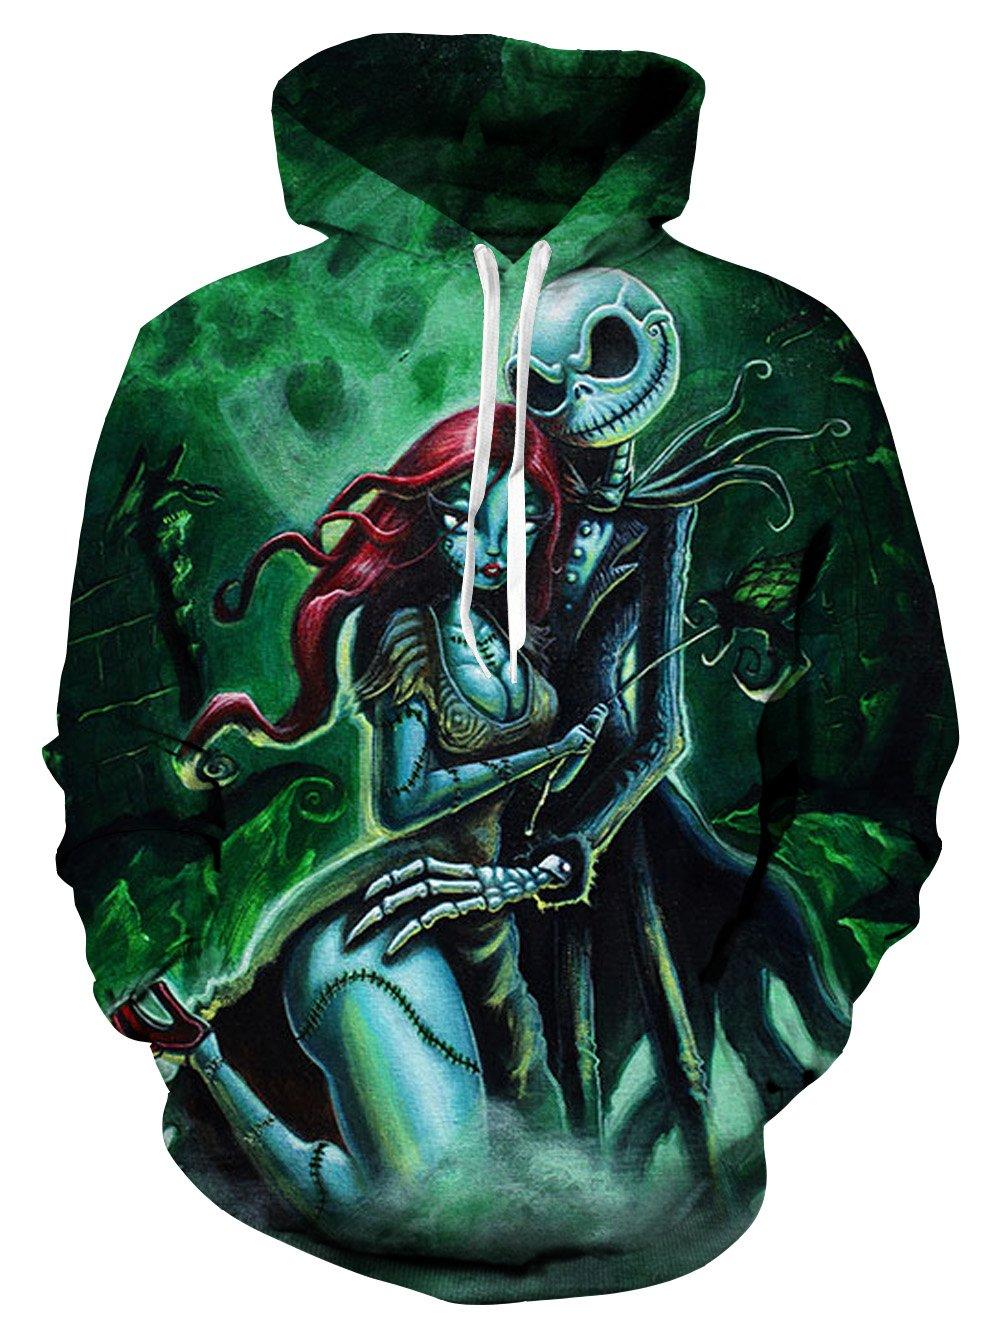 The nightmare before christmas jack skellington and sally halloween 3d hoodie - size XL